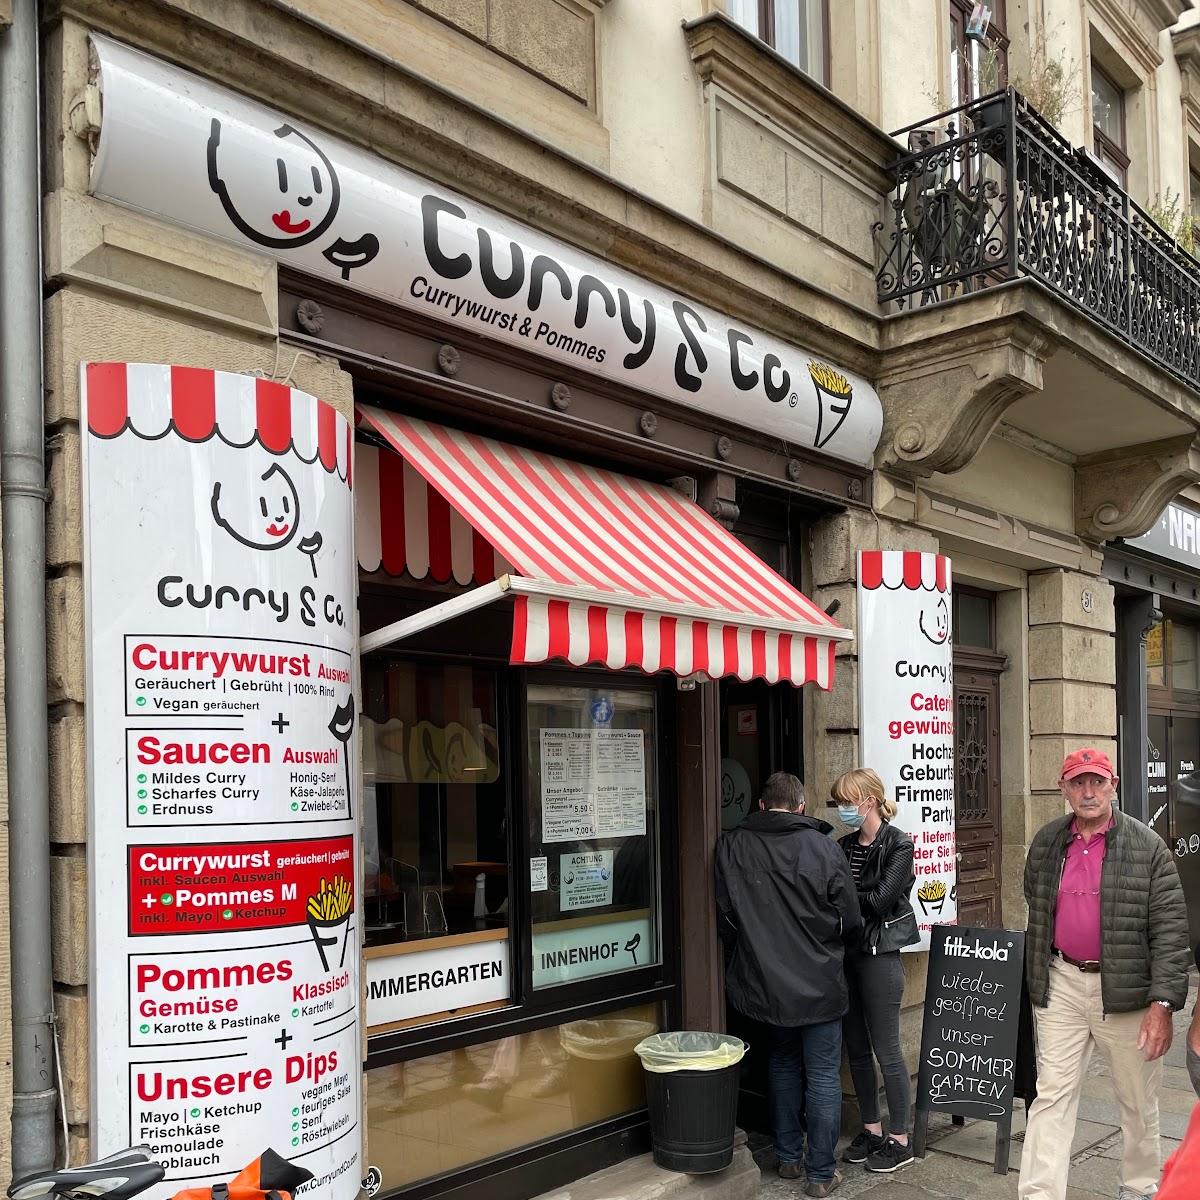 Restaurant "Curry & Co." in Dresden